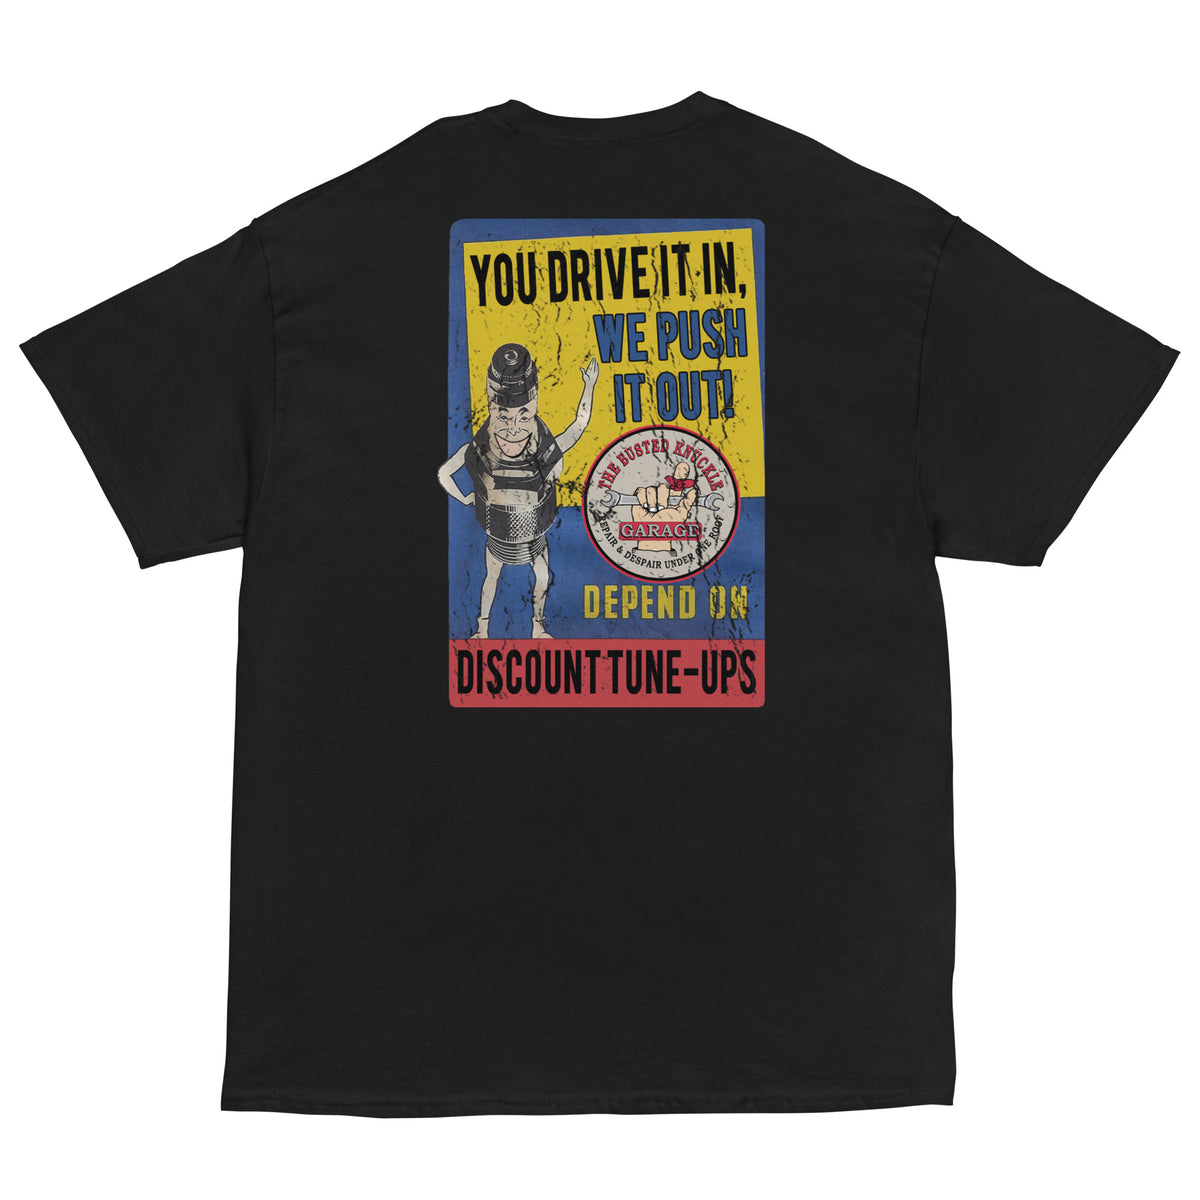 Busted Knuckle Garage Two-Sided Discount Tune-Up Carguy T-Shirt